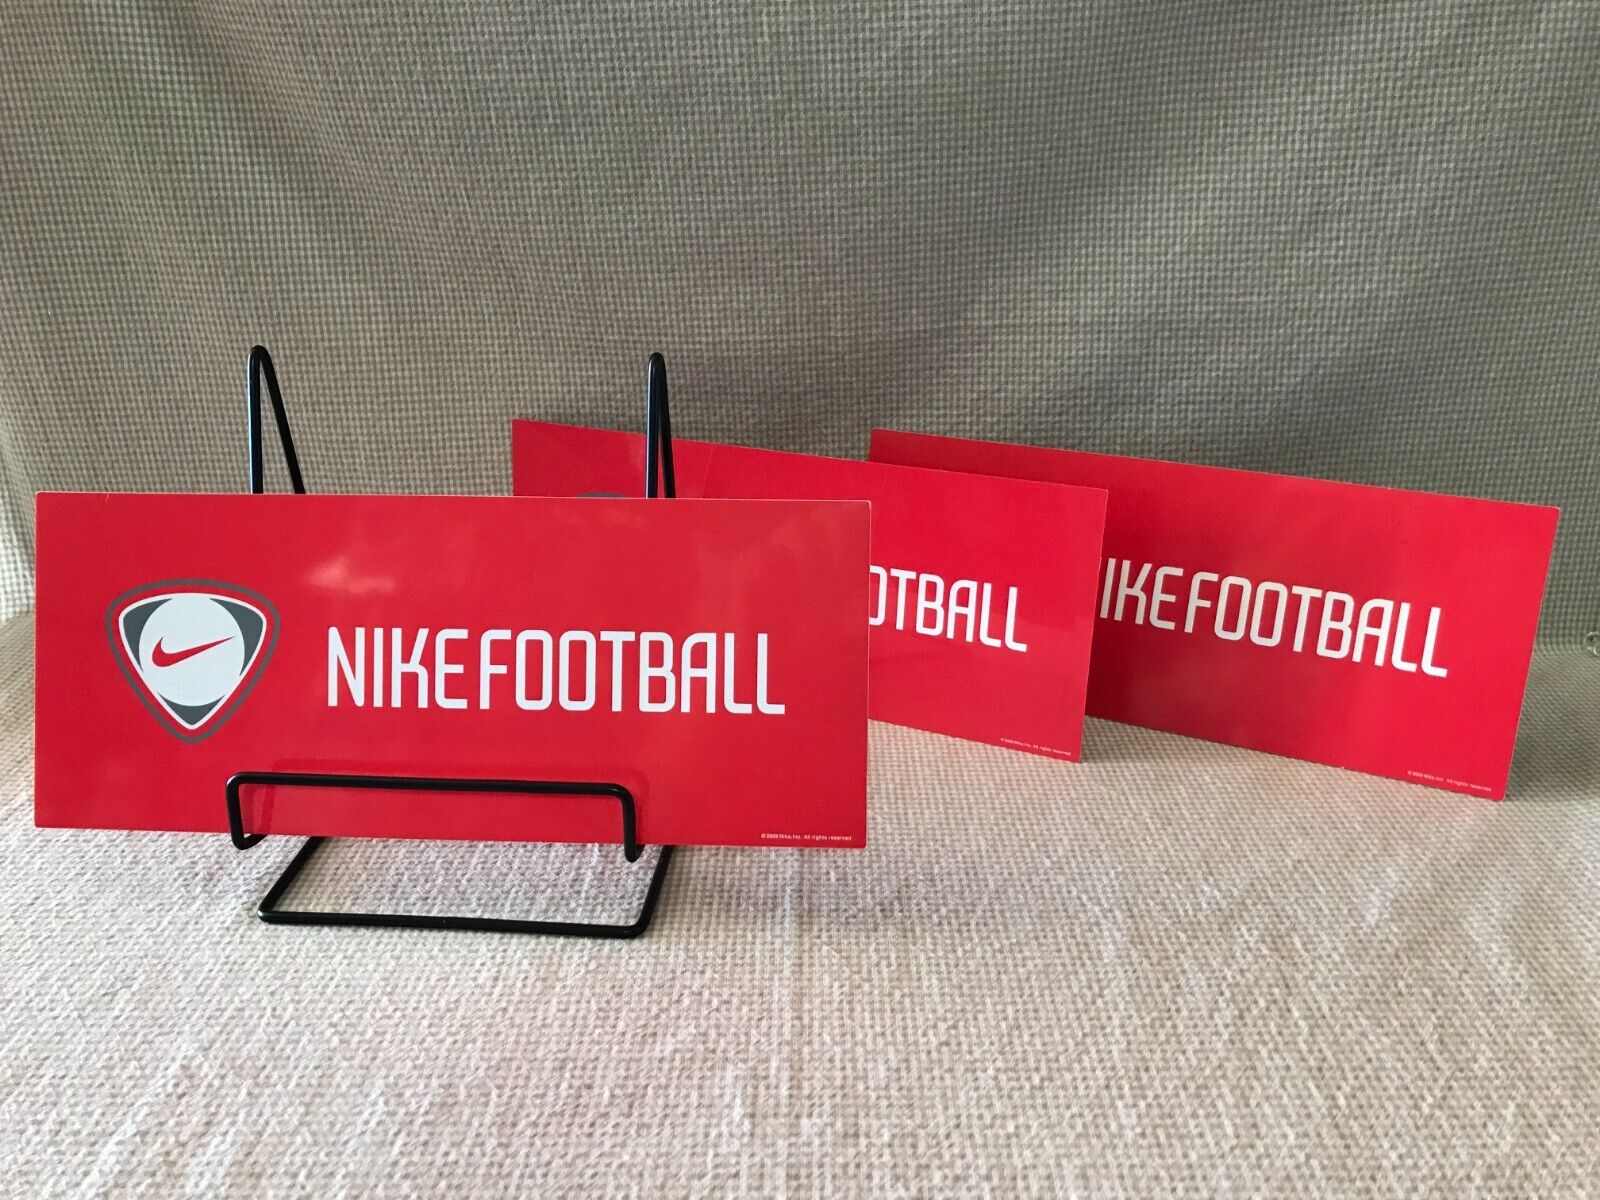 2008　NIKE FOOTBALL .STORE DISPLAY  PANEL 3SHEETS red FROM JAPAN SPORTS SHOP